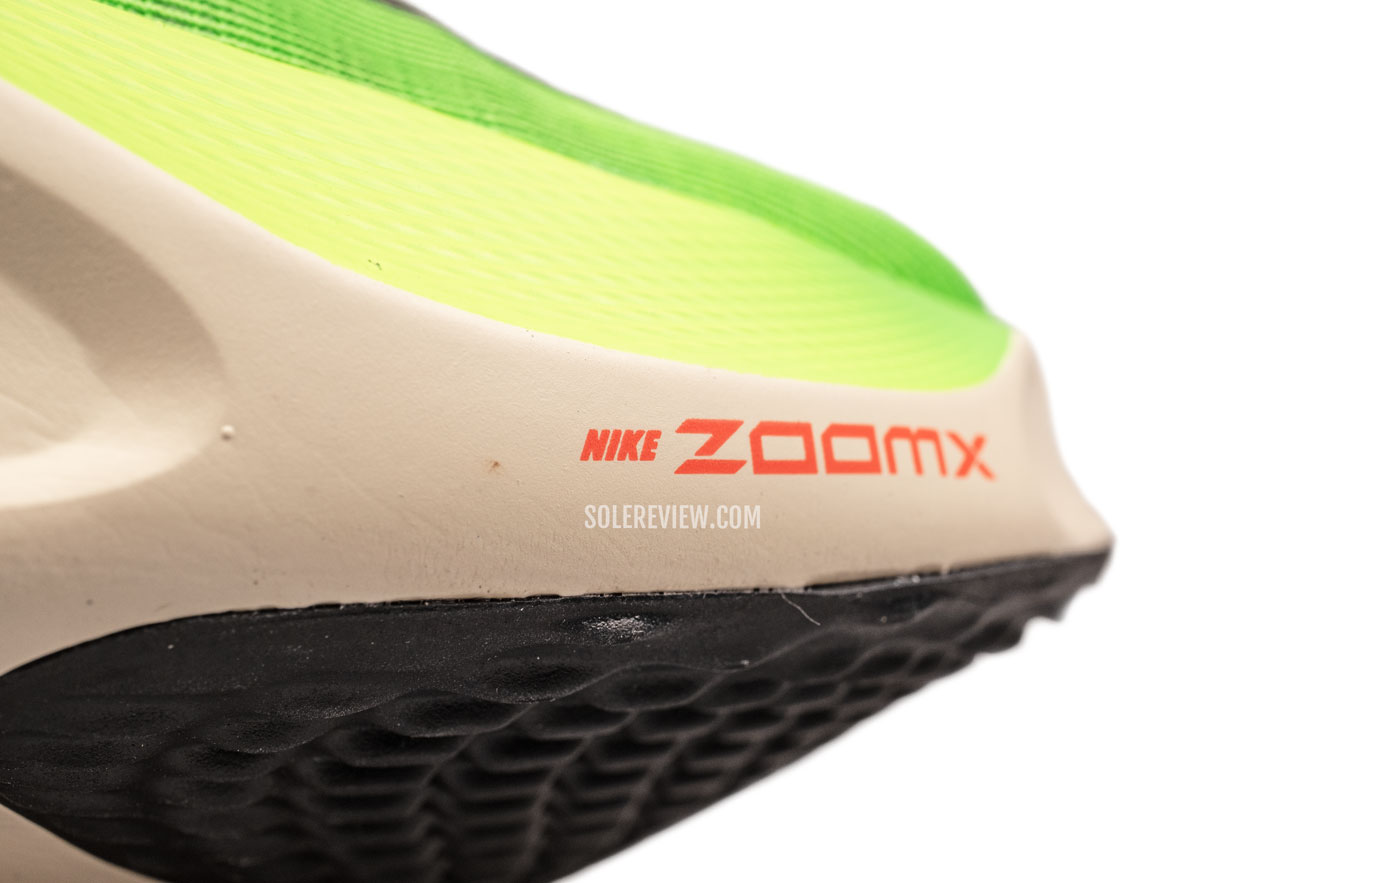 The ZoomX midsole of the Nike Zoom Fly 5.